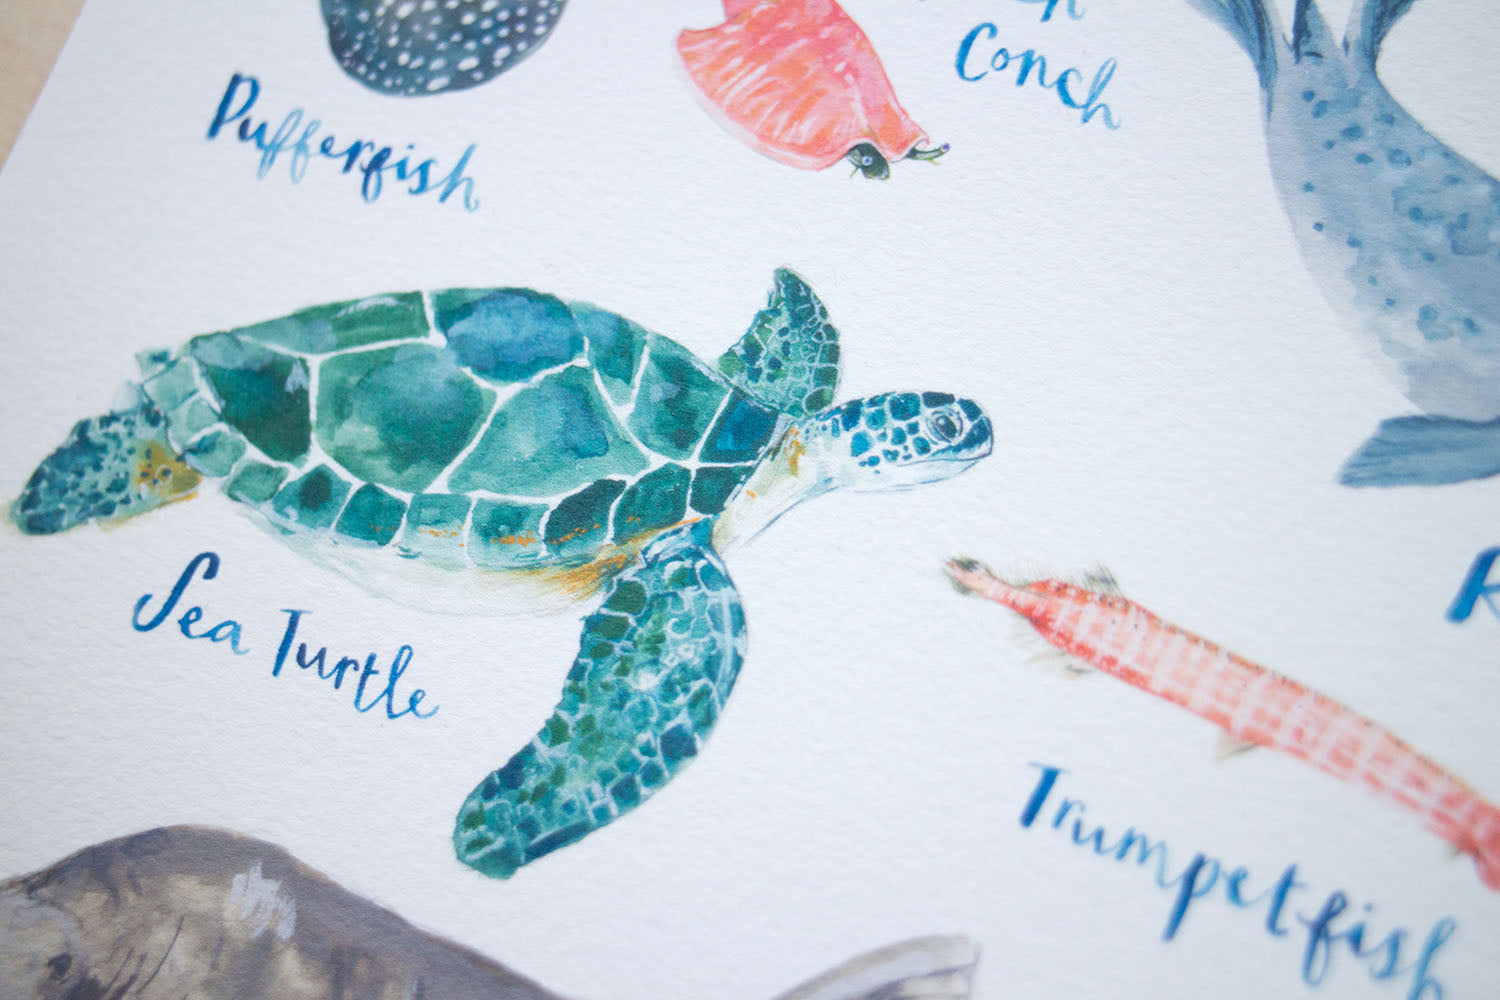 A3 A to Z of Sea Creatures Art Print